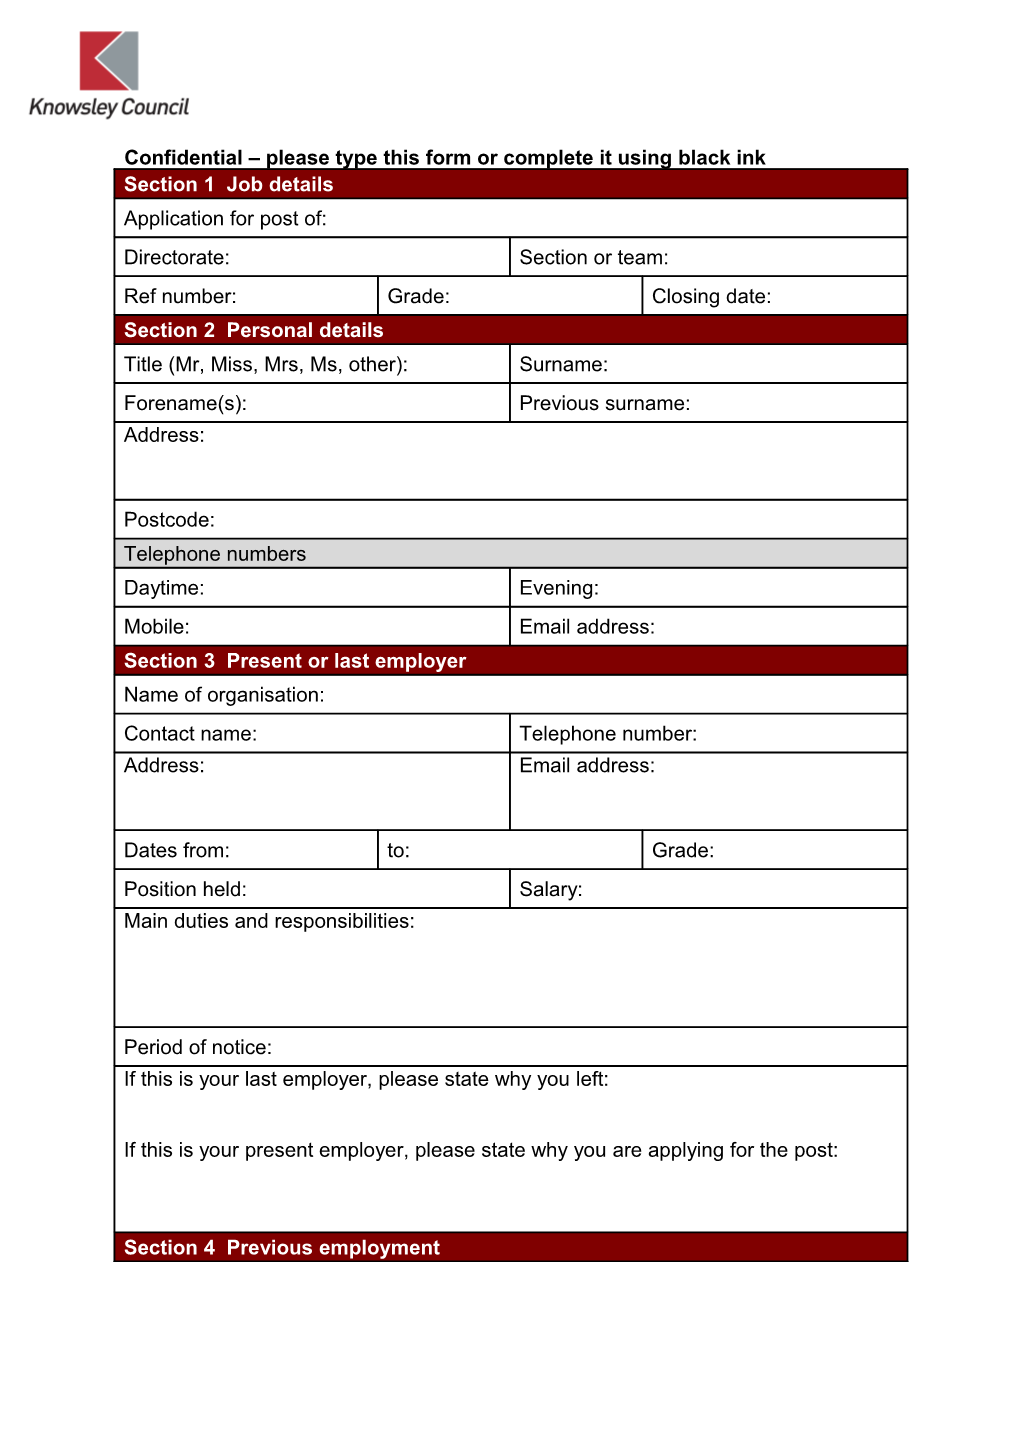 Confidential Please Type This Form Or Complete It Using Black Ink